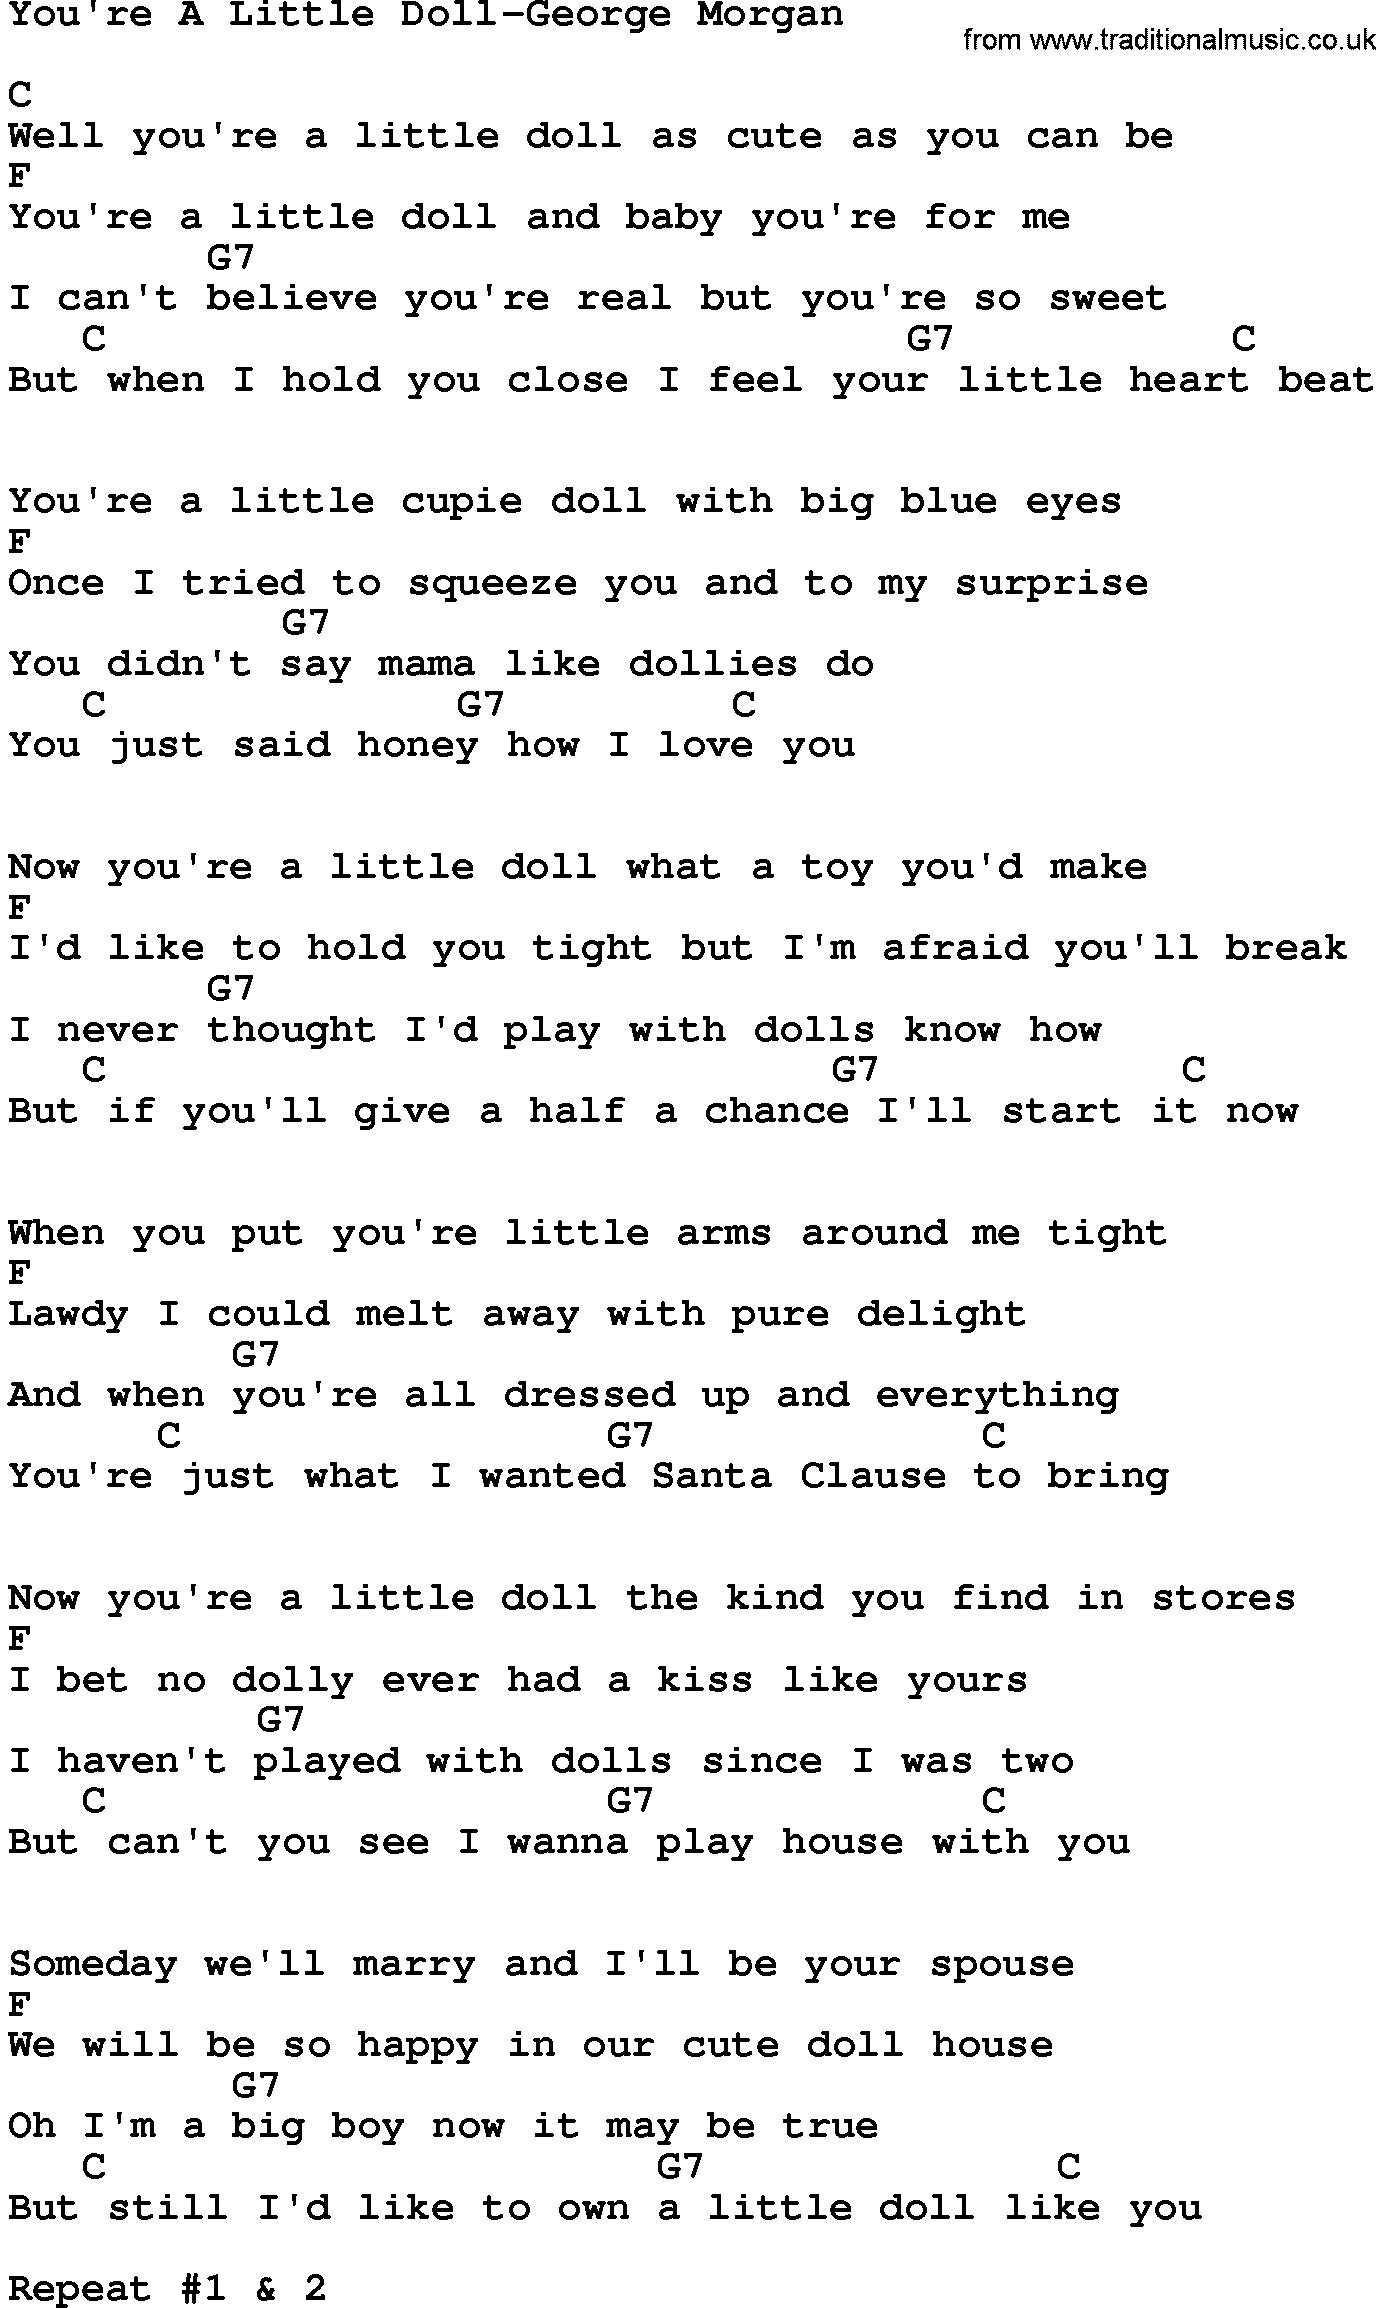 Country music song: You're A Little Doll-George Morgan lyrics and chords